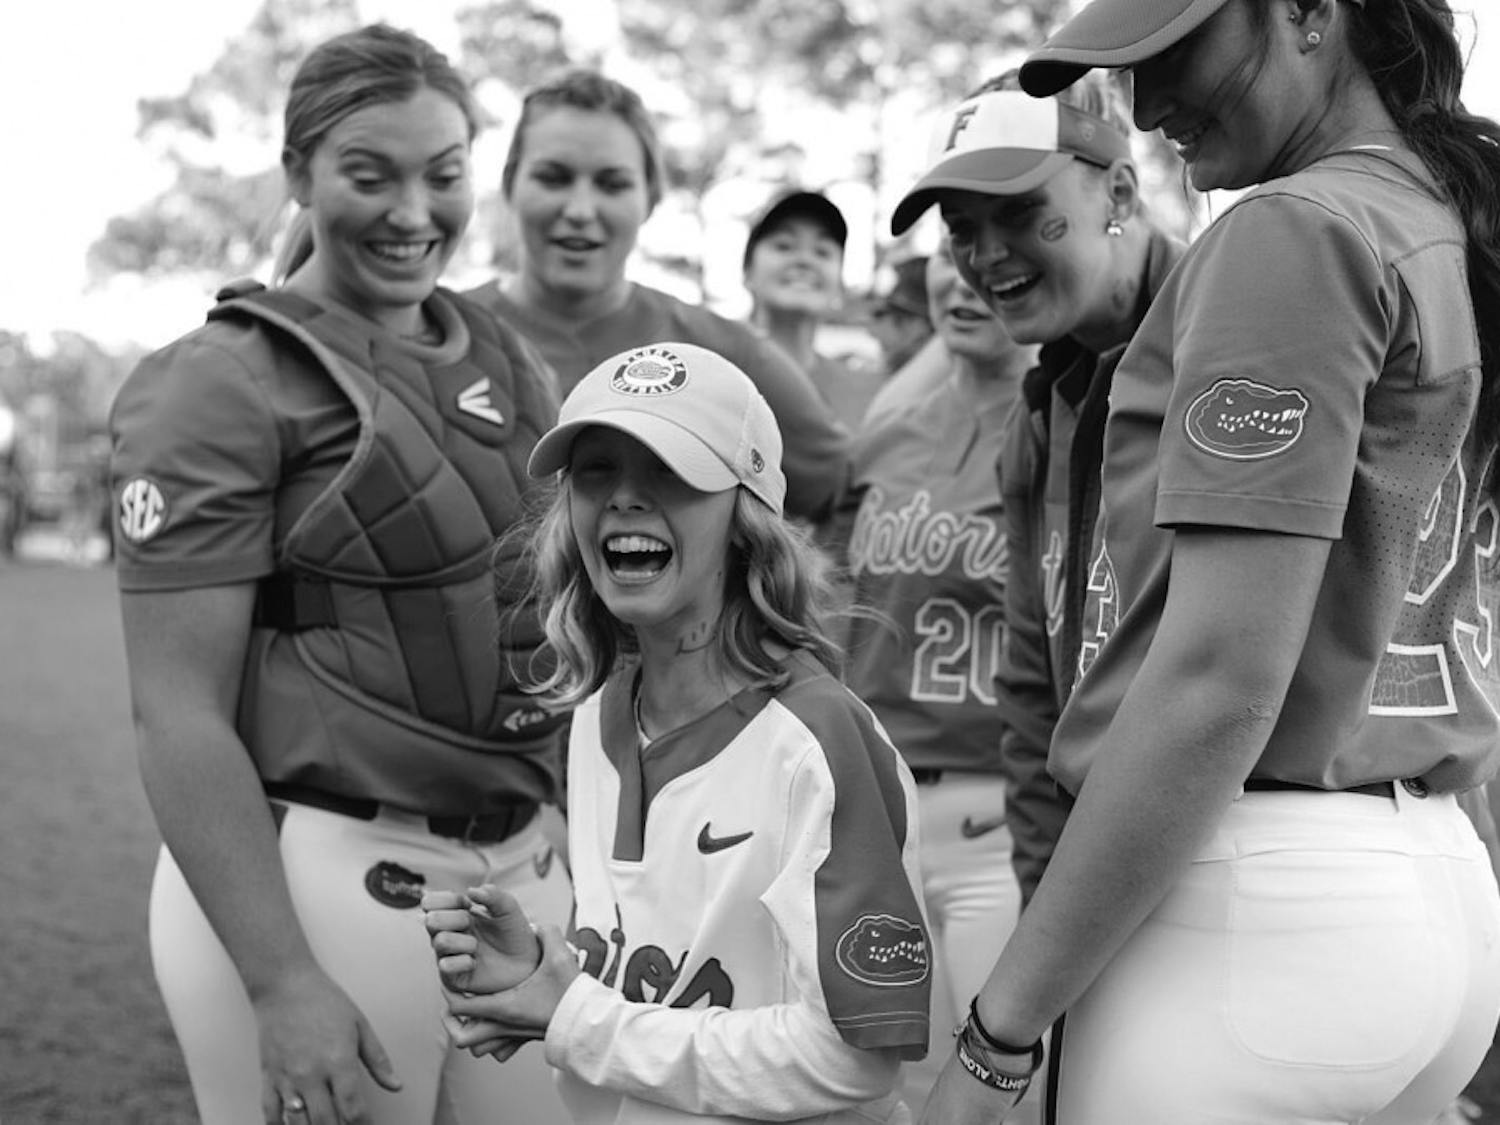 Hartley interacts with her Florida teammates ahead of UF's matchup with Florida State on April 3. Hartley, her teammates and the Seminoles all drew smiley faces on their necks to replicate that of Hayden Stone, an member of Florida State's team adopted through the Friends of Jaclyn. Hayden is now cancer free!